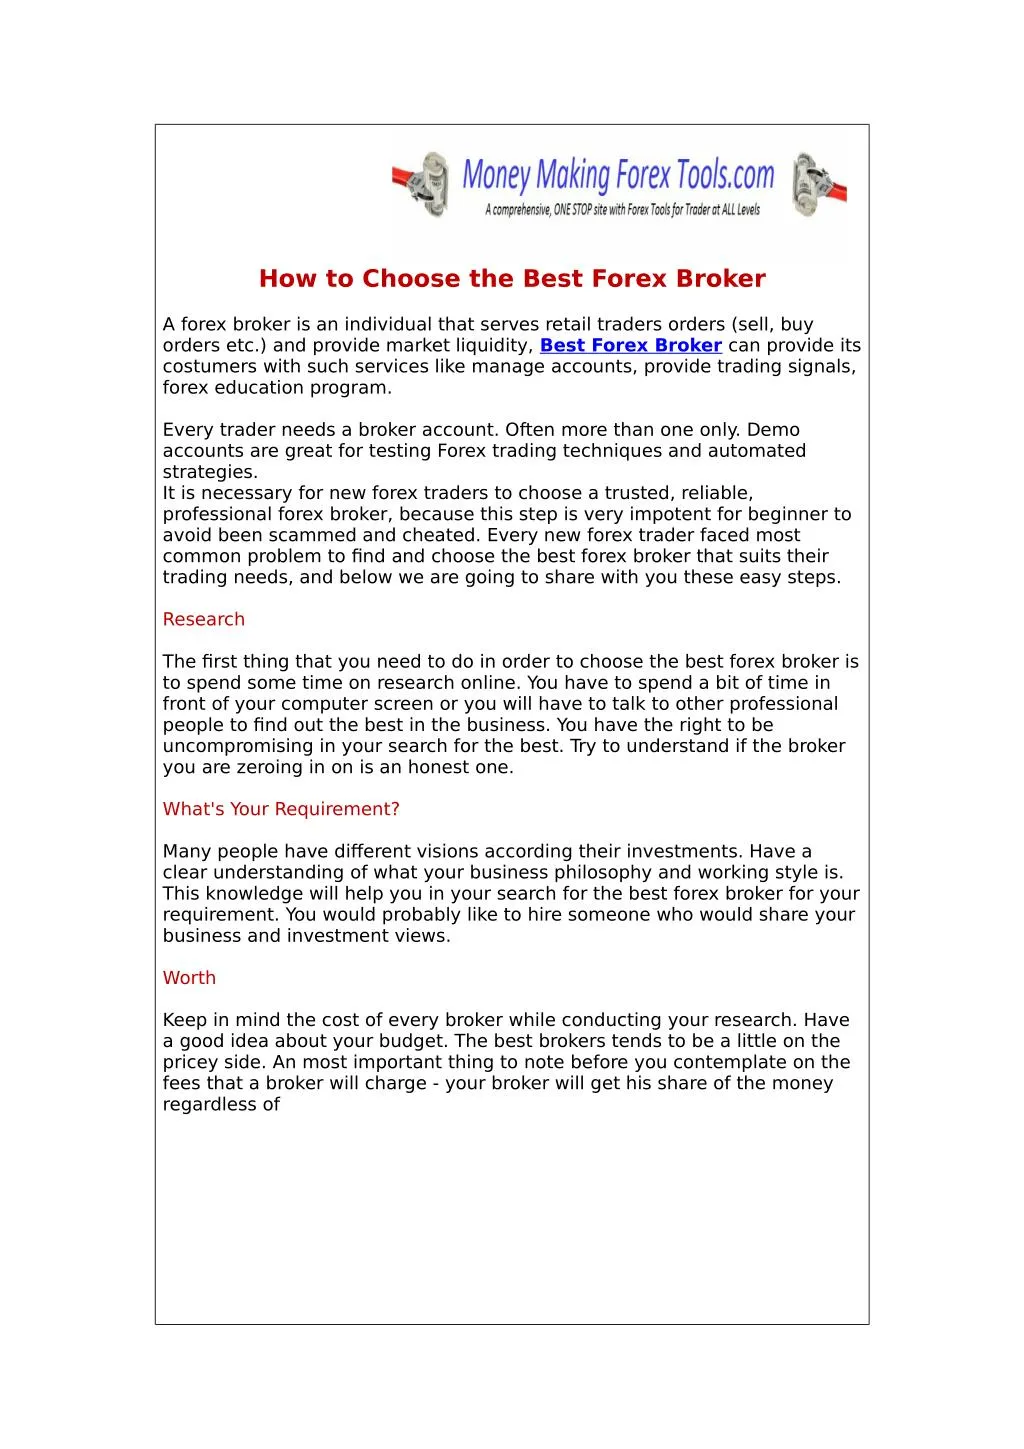 how to choose the best forex broker